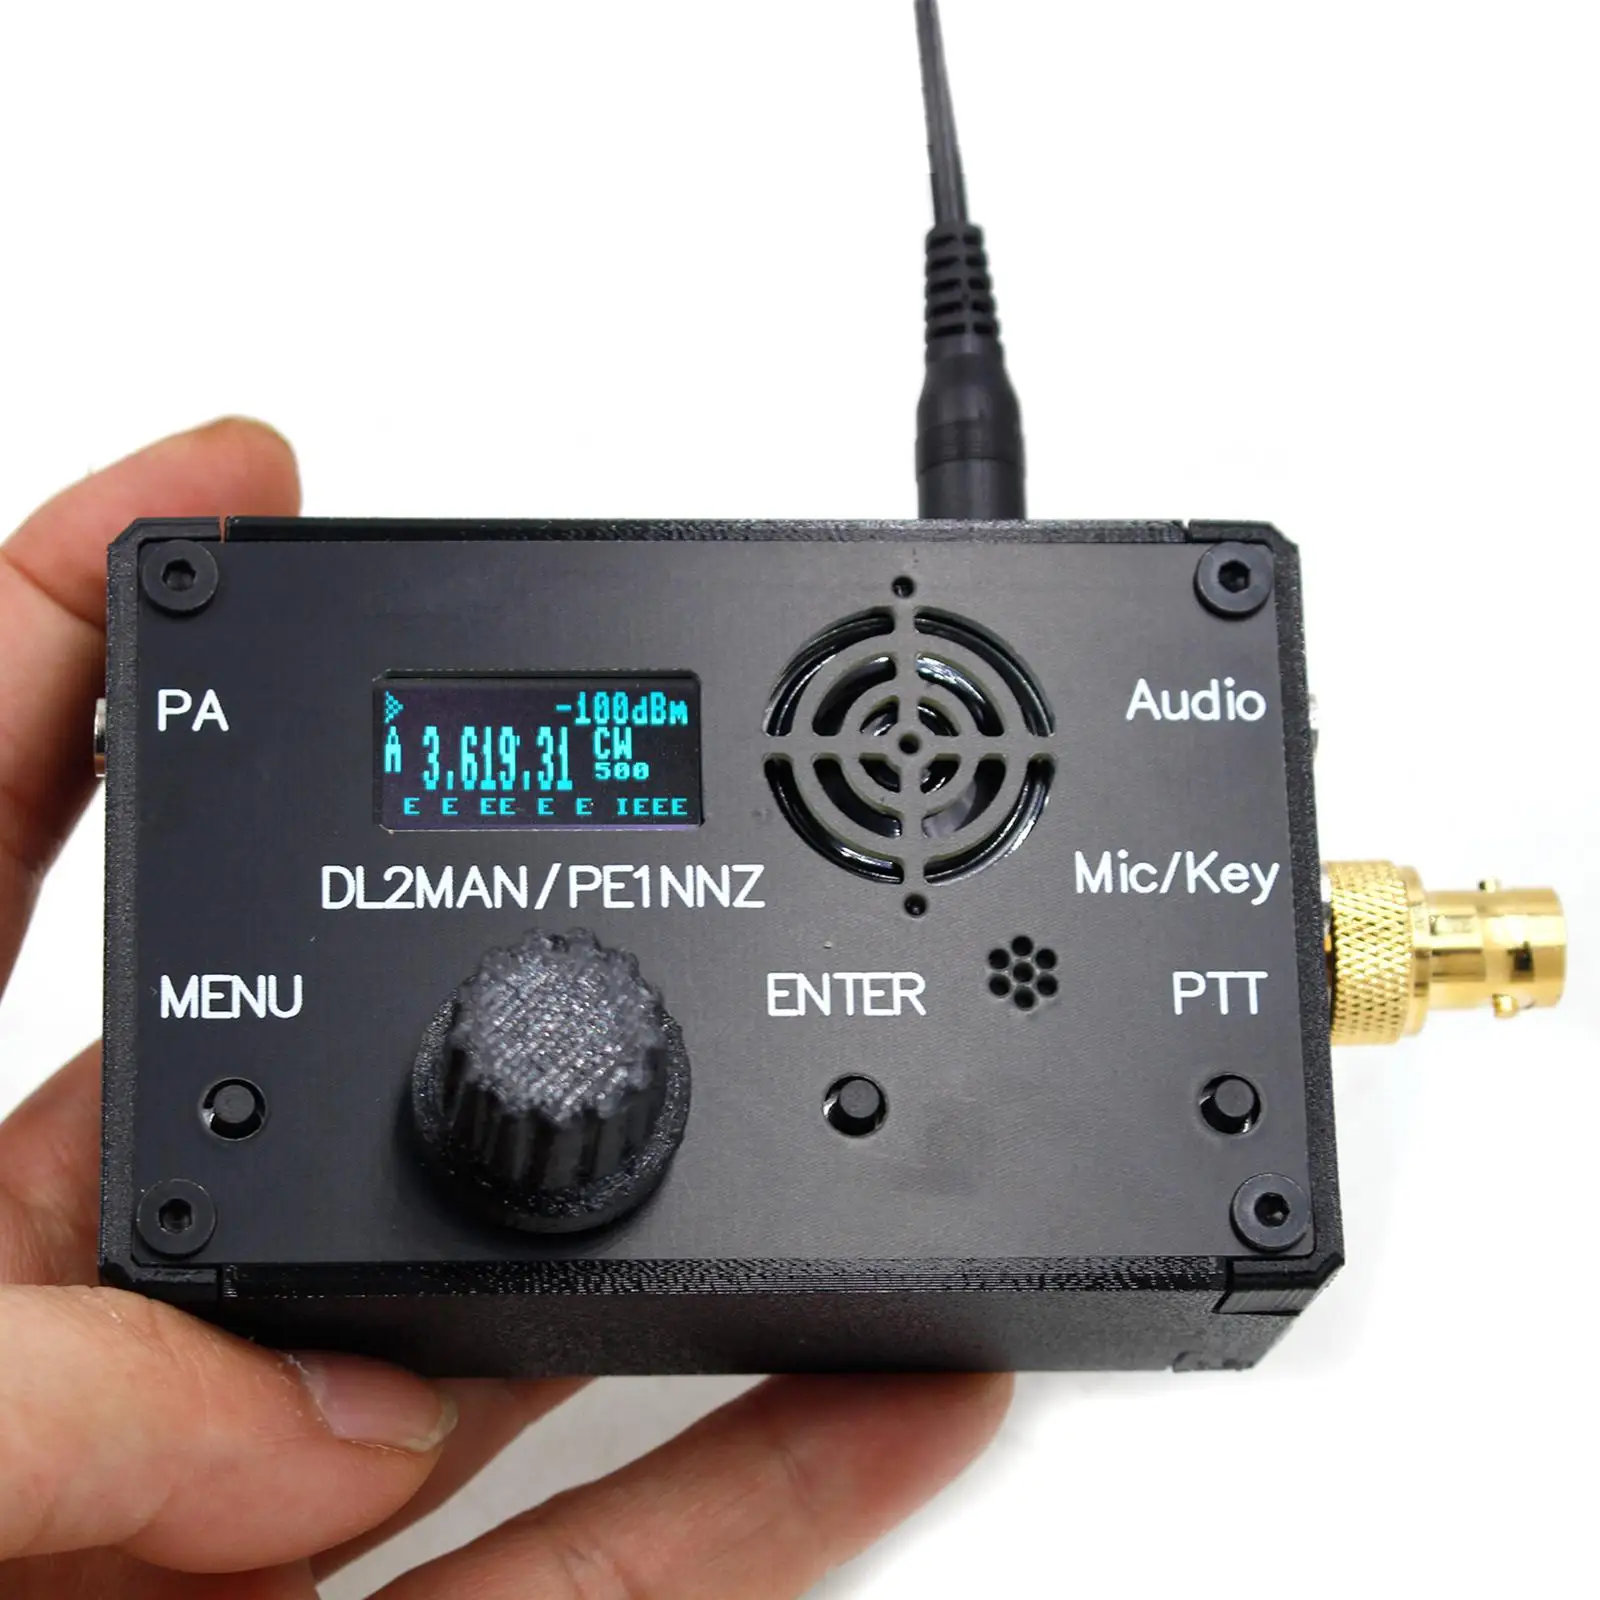 Transceivers 5 Band Receiving Equipment Durable (TRs)USDXs Multimode Transceivers